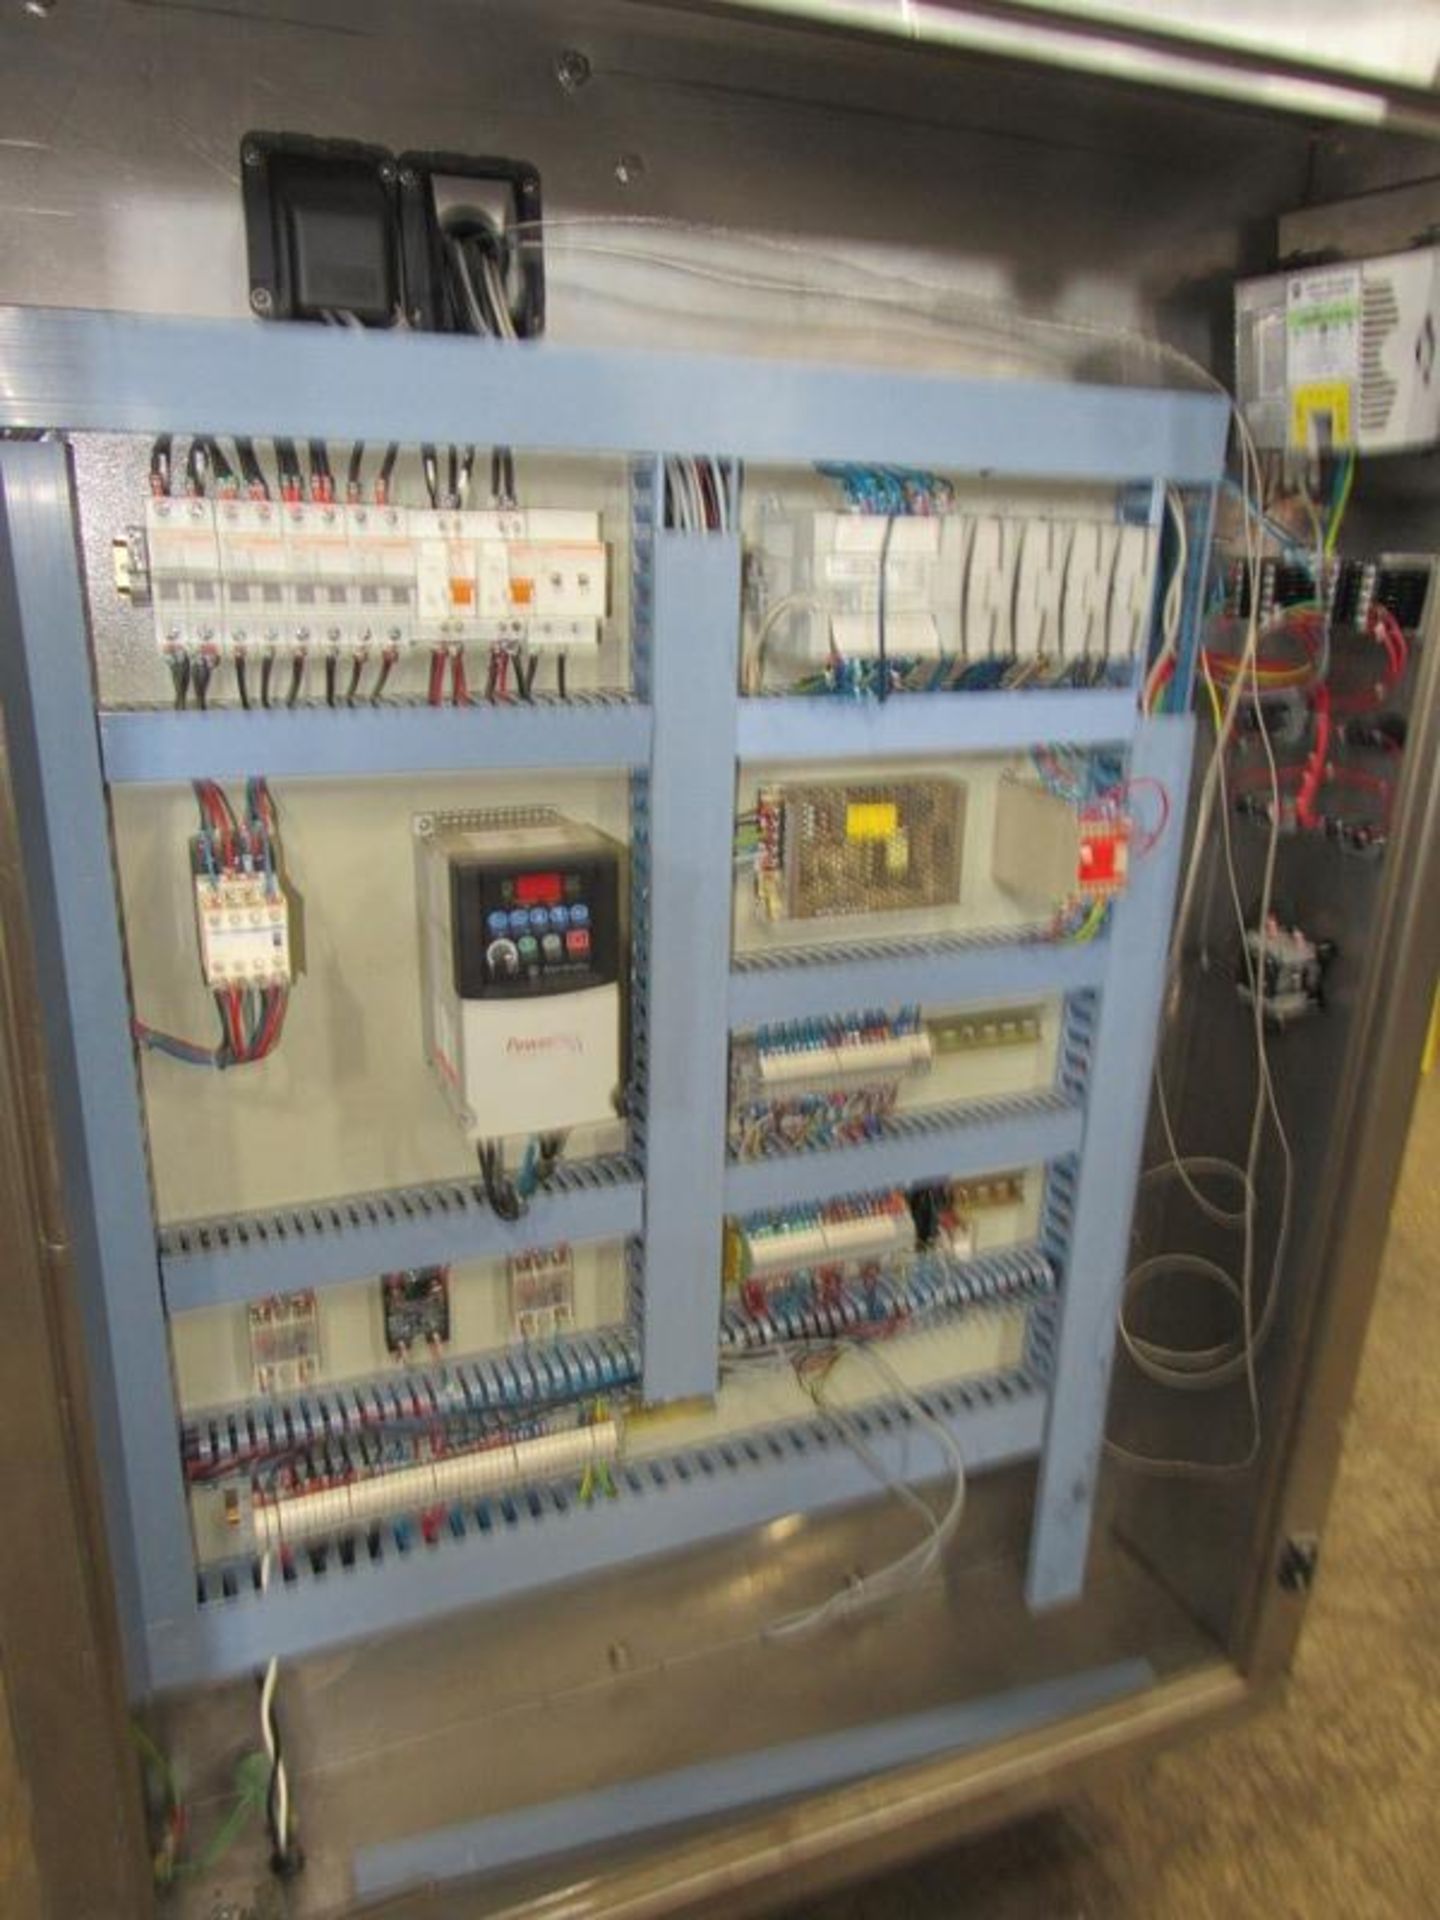 Weigh Pack Mdl. Swifty 3600 Bagger, Ser. #3042, 220 volts, 1 phase, Allen Bradley Panel View 600 - Image 11 of 14